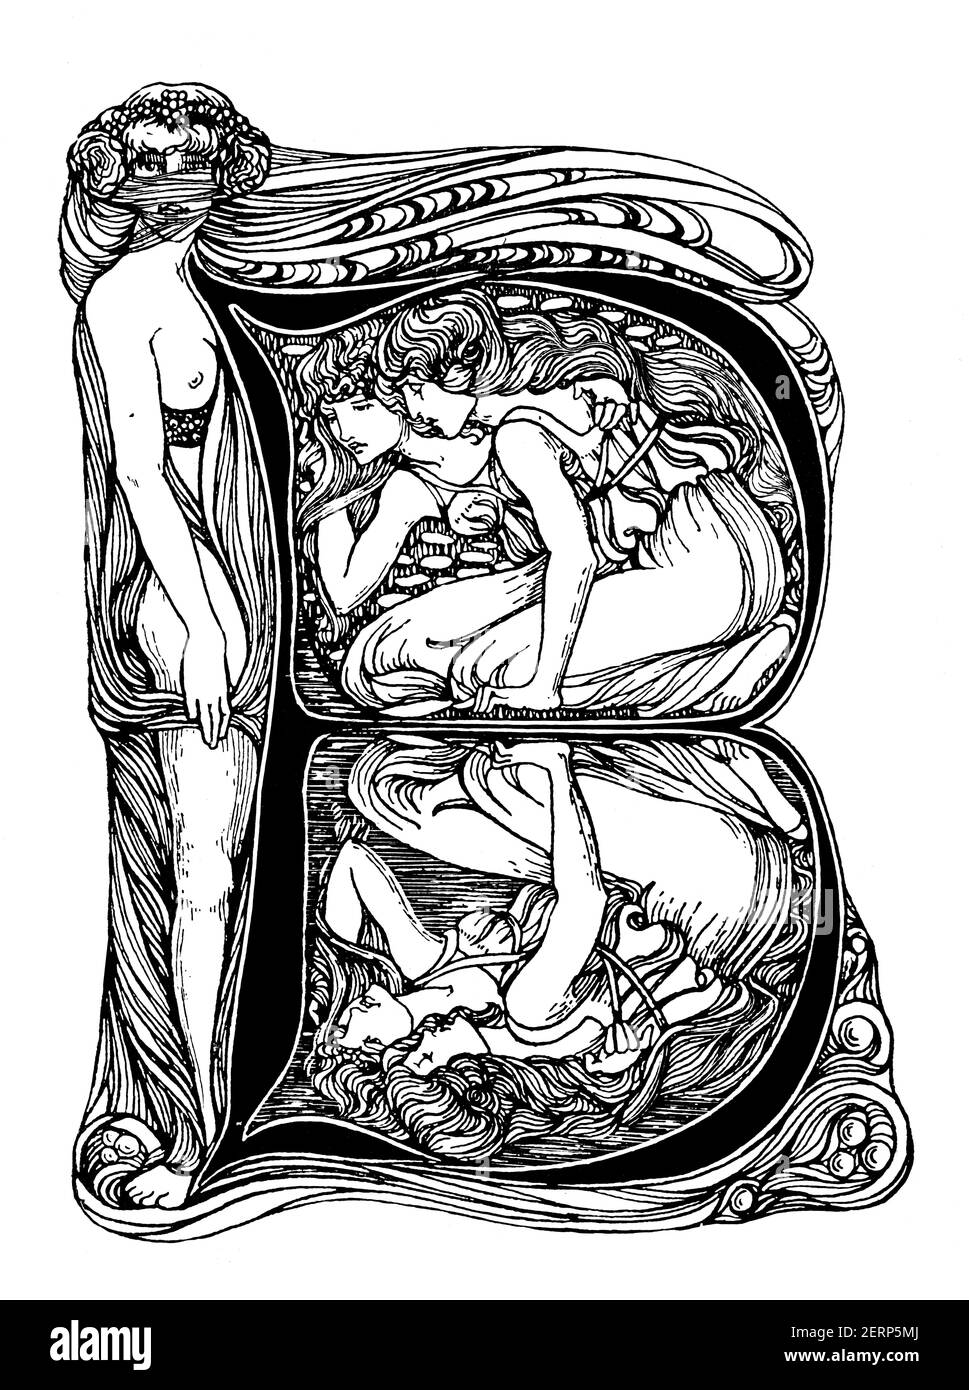 Illustrated initial, letter B, Art nouveau design by British illustrator and embroiderer Christine Drummond Angus (later Angus-Sickert), from 1900 The Stock Photo